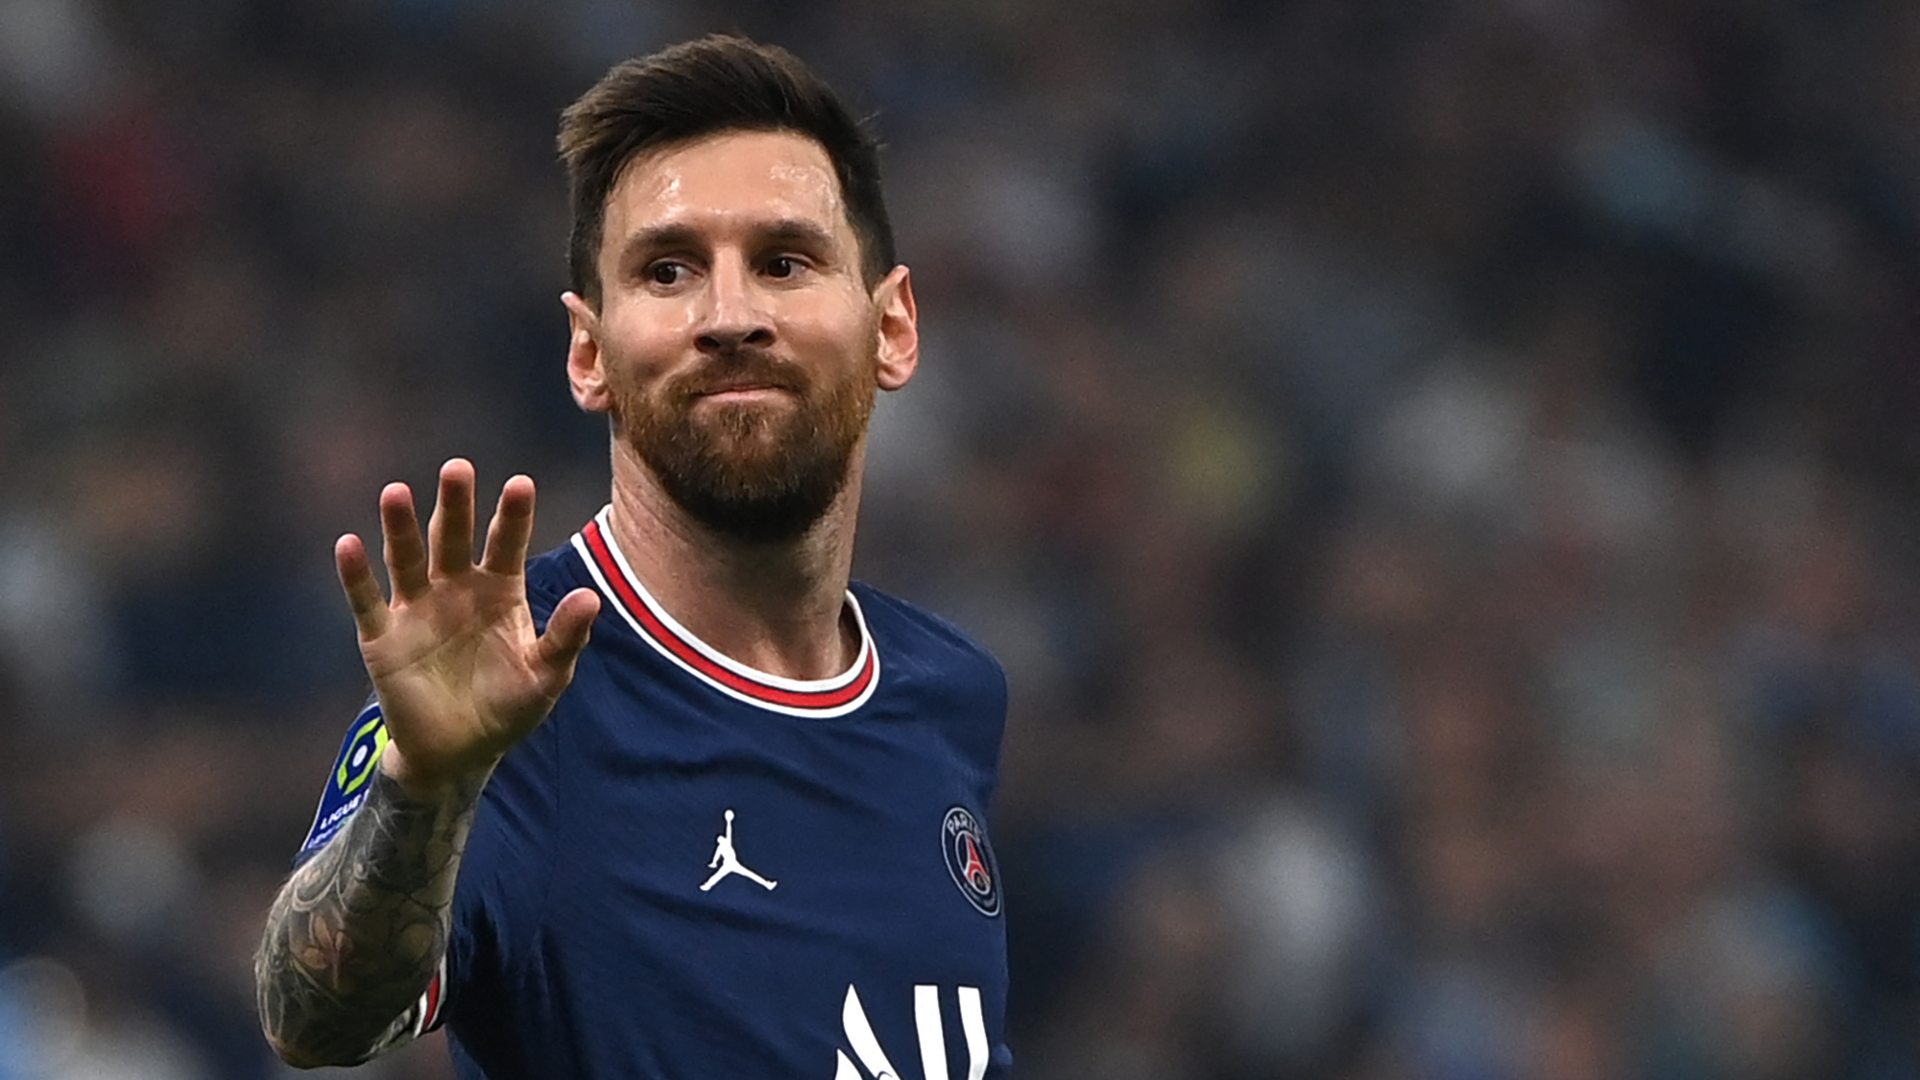 WATCH: Pitch invader ruins PSG attack in Marseille draw as Messi makes worst league start in 16 years